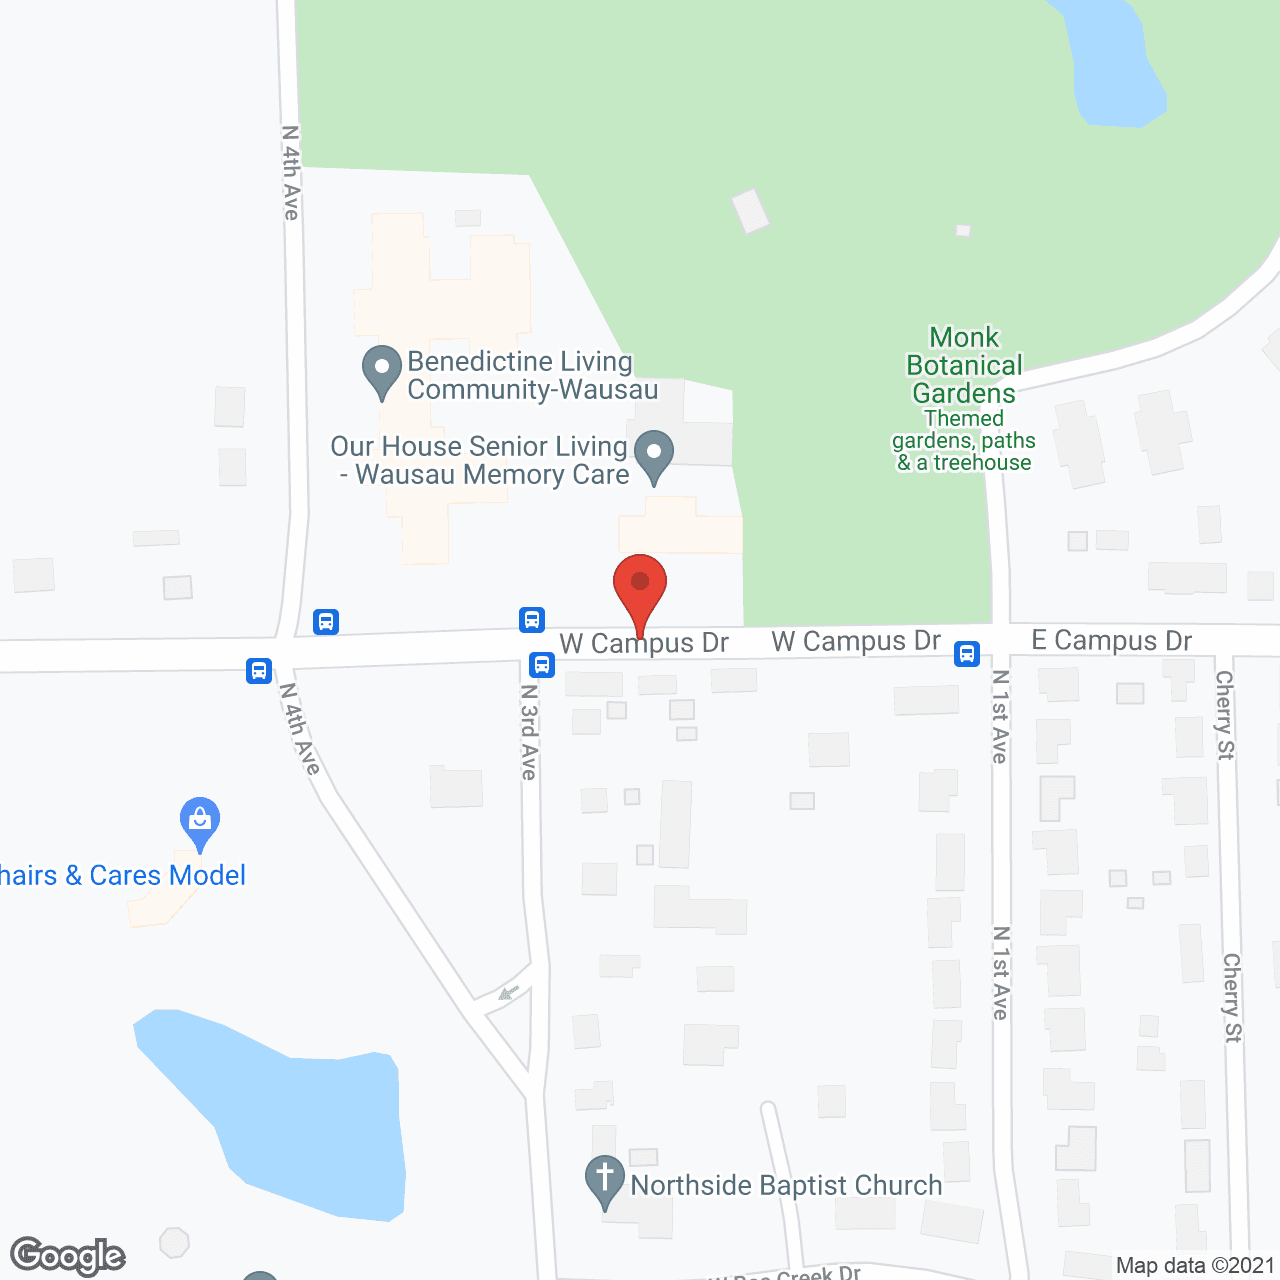 Our House Senior Living Memory Care - Wausau in google map